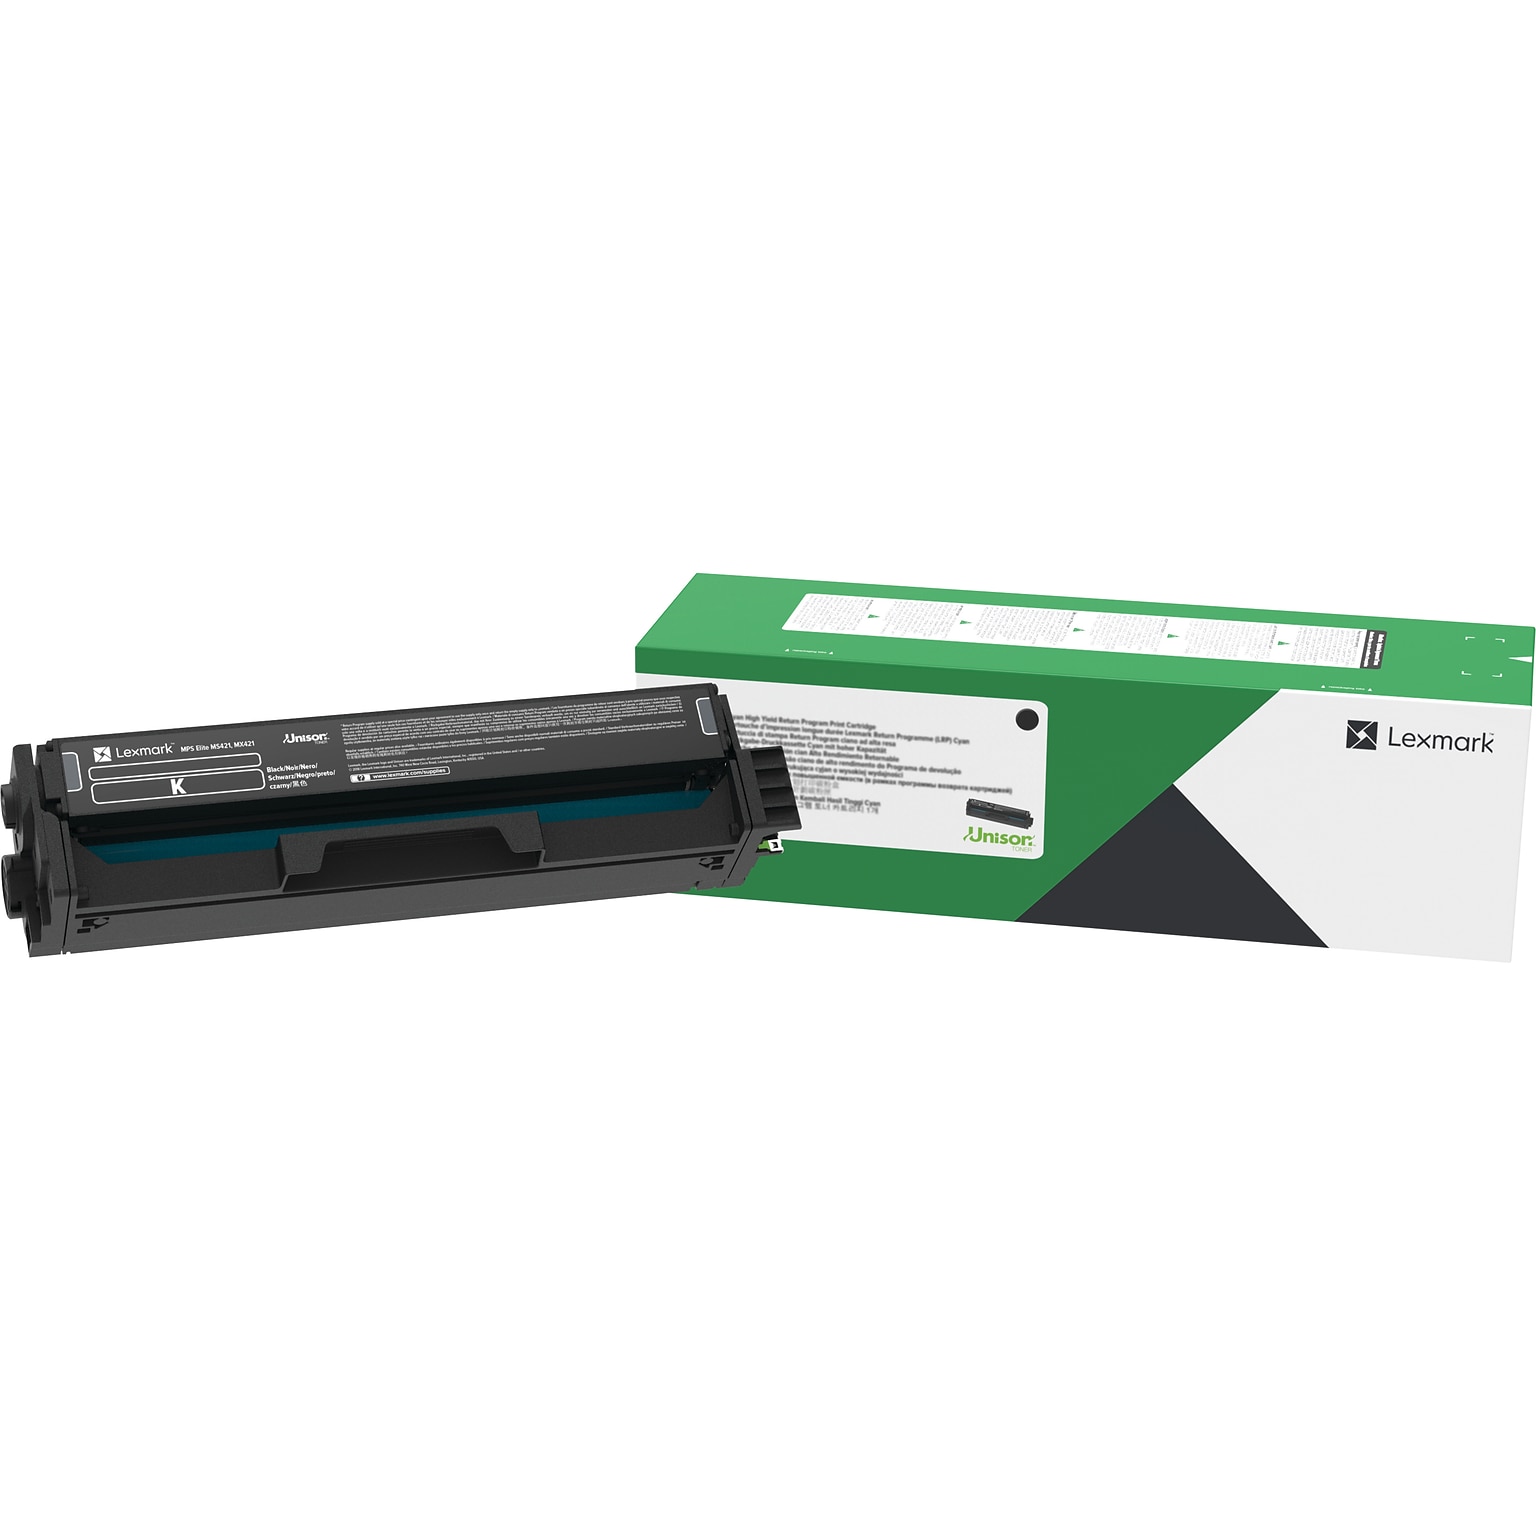 Lexmark C341XK0 Black Extra High Yield Toner Cartridge, Prints Up to 4,500 Pages